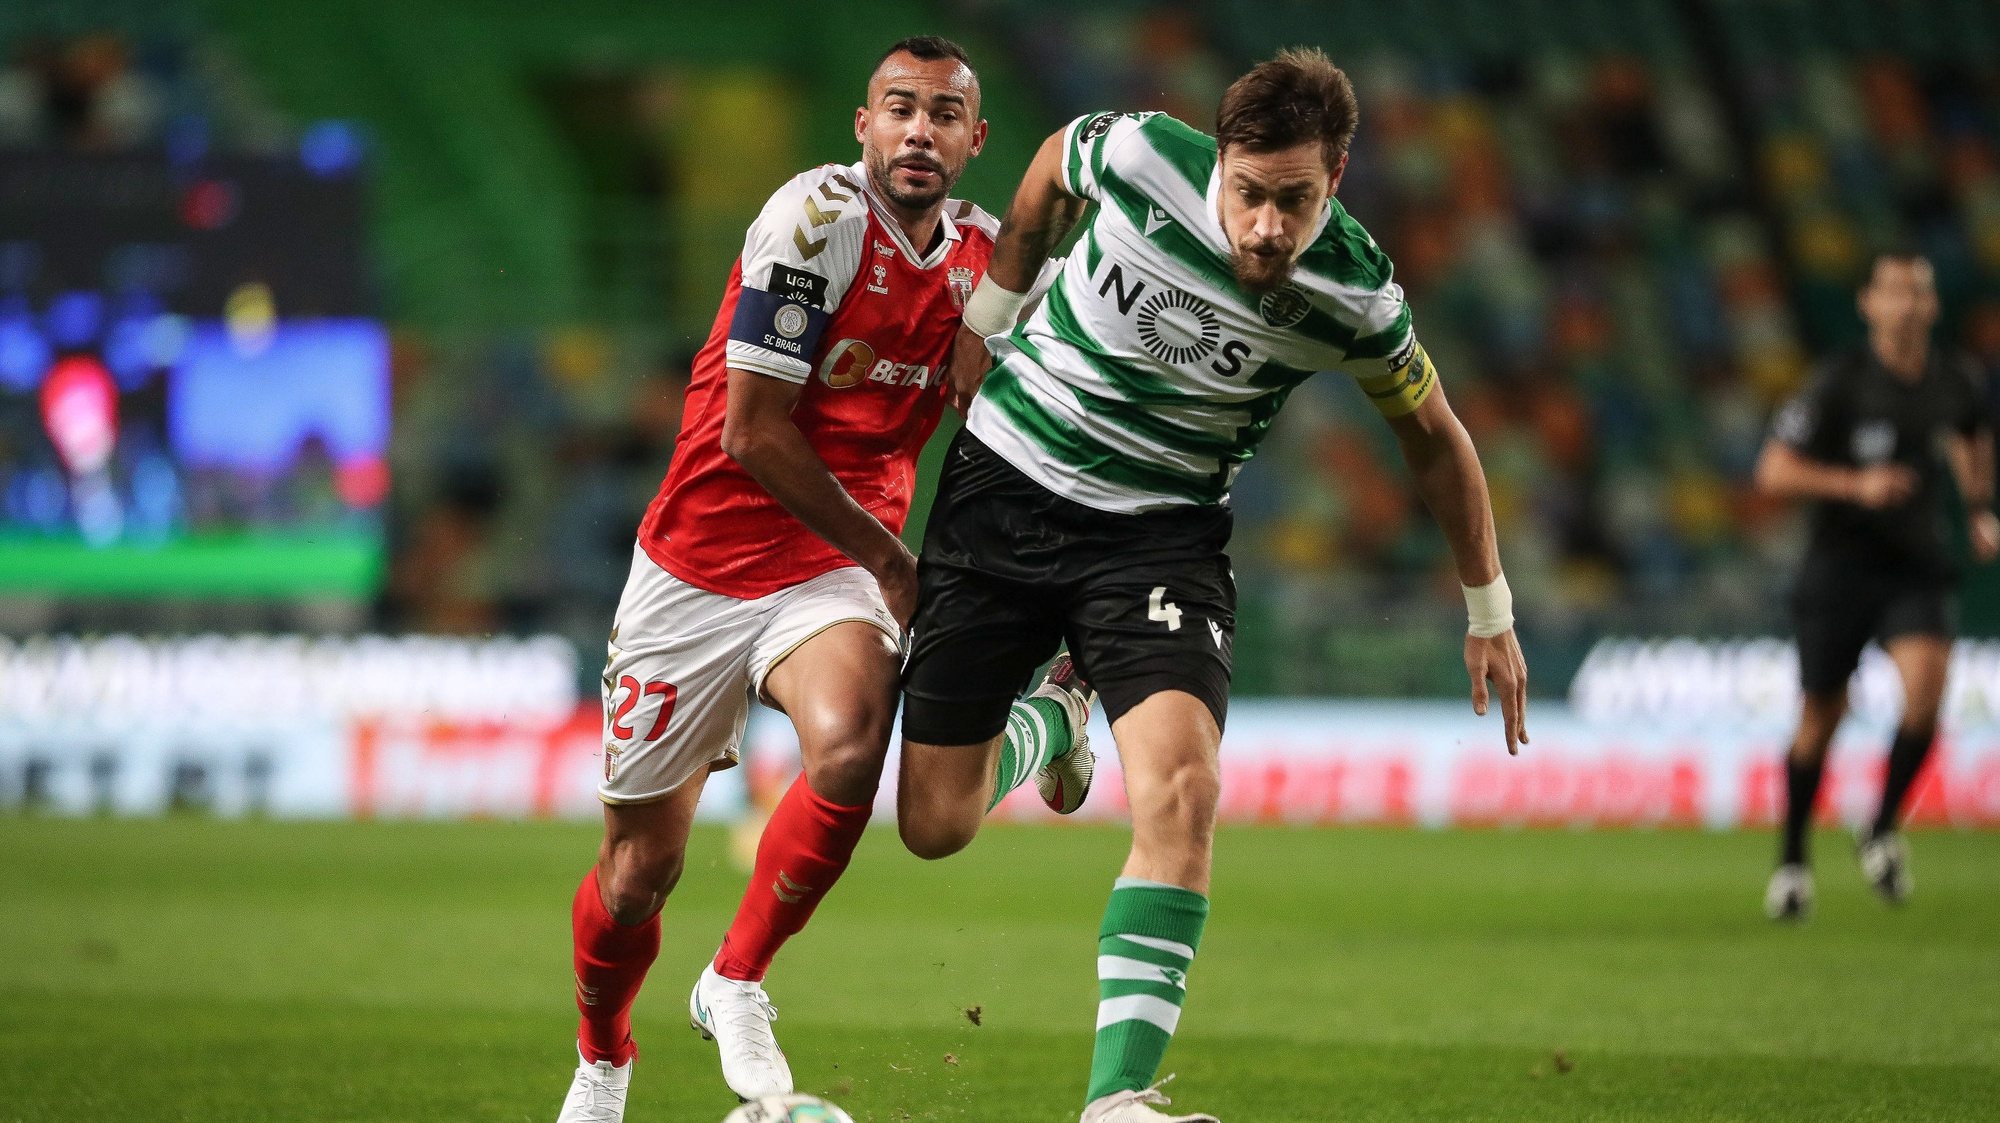 epa08915846 Sporting&#039;s Coates (R) in action against Sporting de Braga&#039;s Fransergio during the Portuguese First League soccer match held at Alvalade Stadium, in Lisbon, Portugal, 02 January 2021.  EPA/MARIO CRUZ